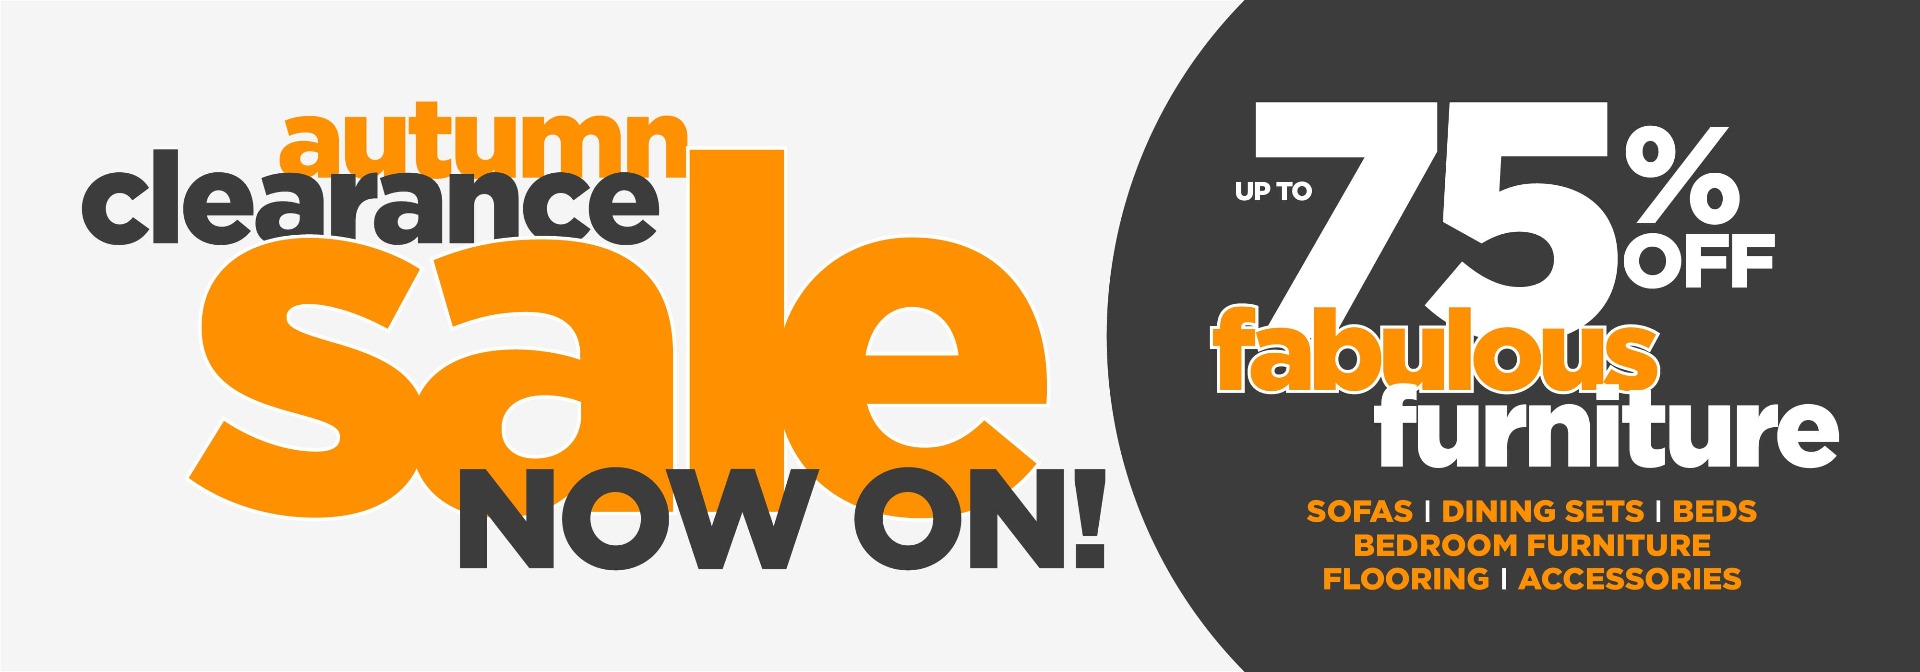 Taskers Autumn Clearance Sale Now On